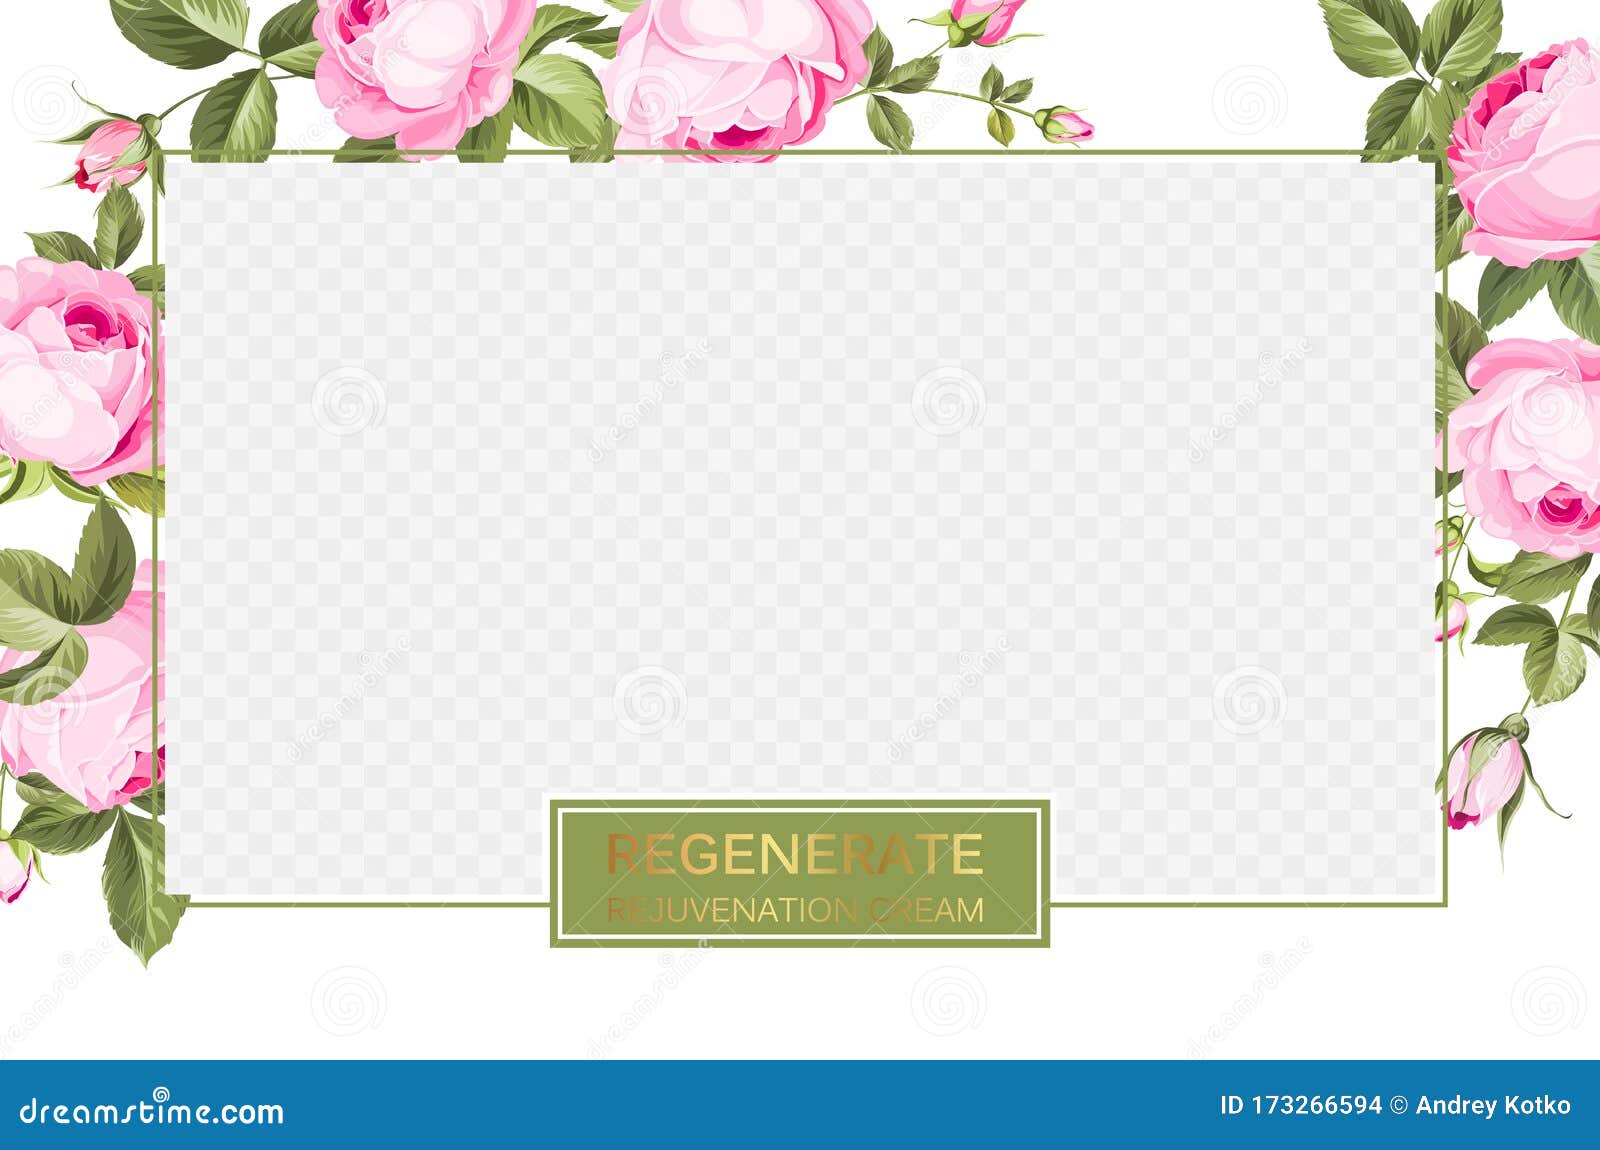 cover , transparent product package window, and blossom rose flower border. regenerate cream label  with